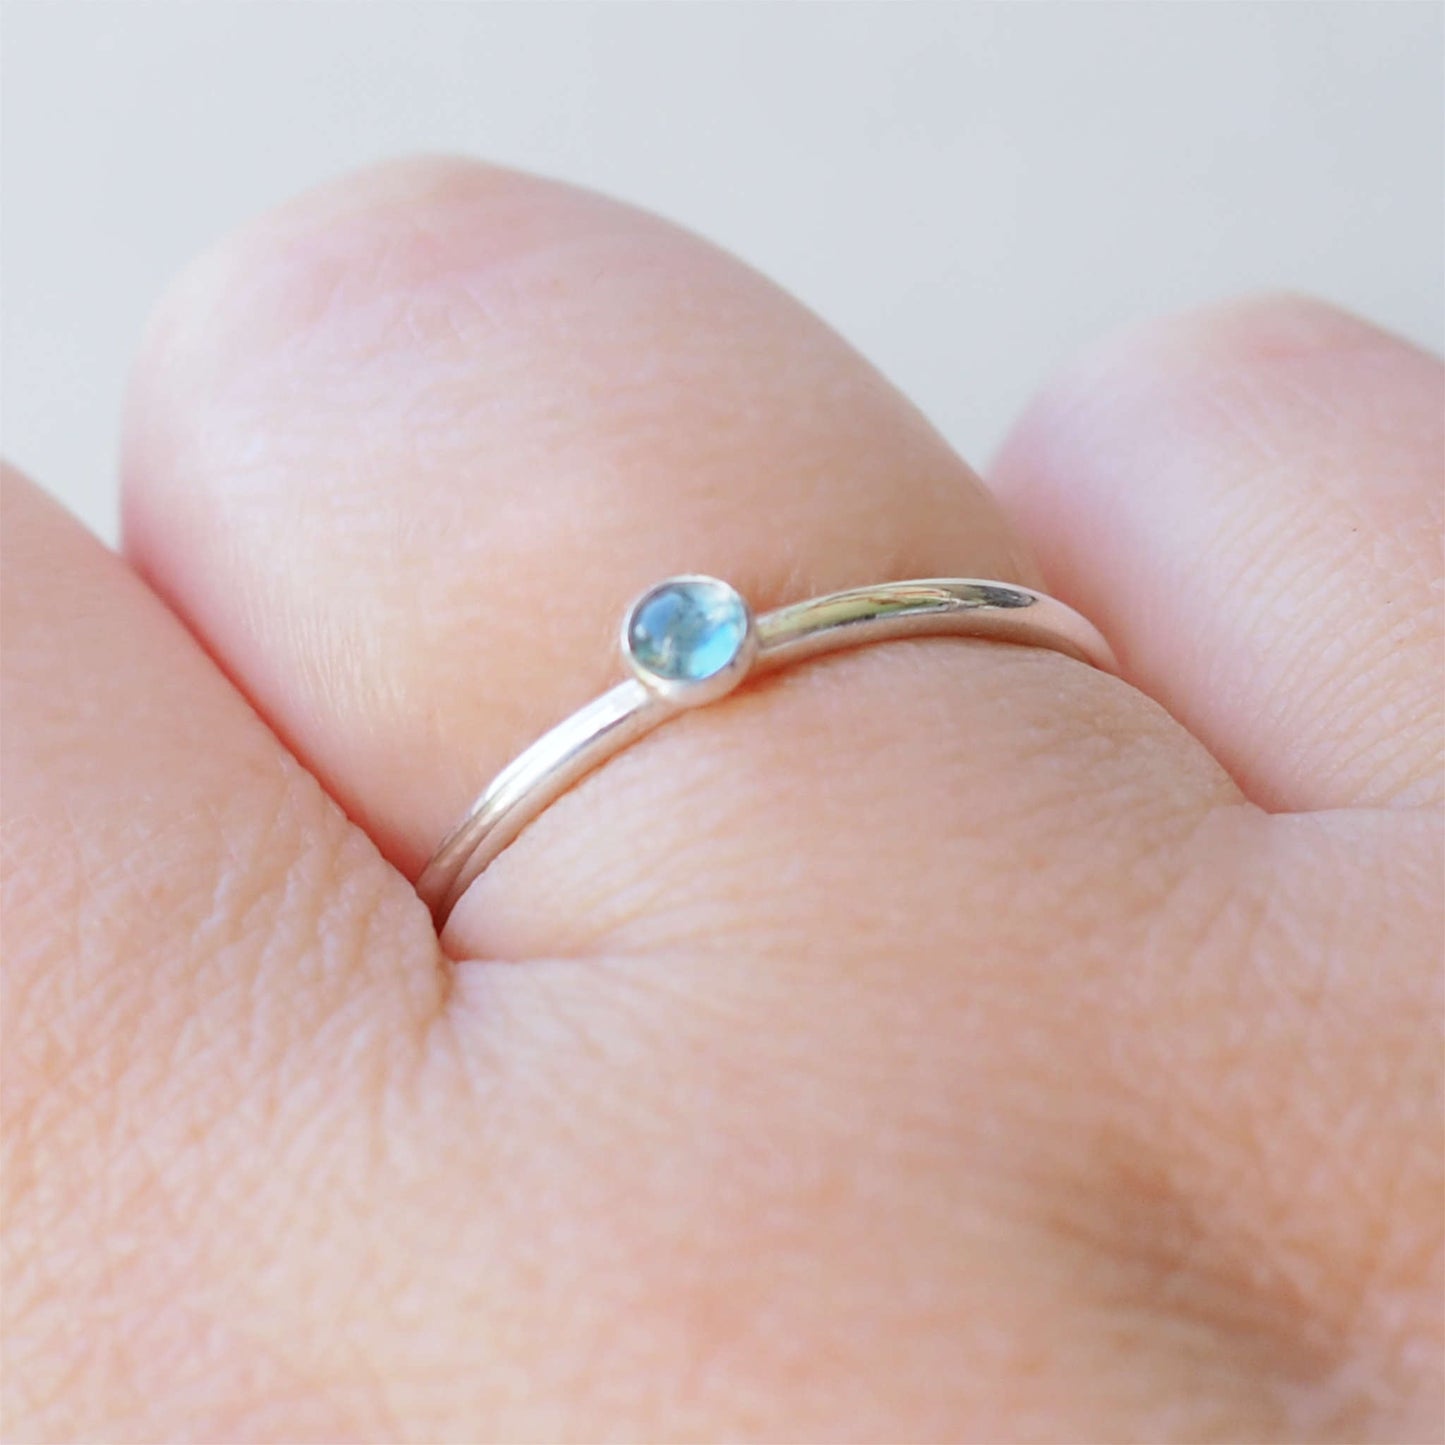 Small gemstone ring in sterling silver with a modern round band with a 3mm sized round light blue Aquamarine. Handmade in Edinburgh by Maram Jewellery